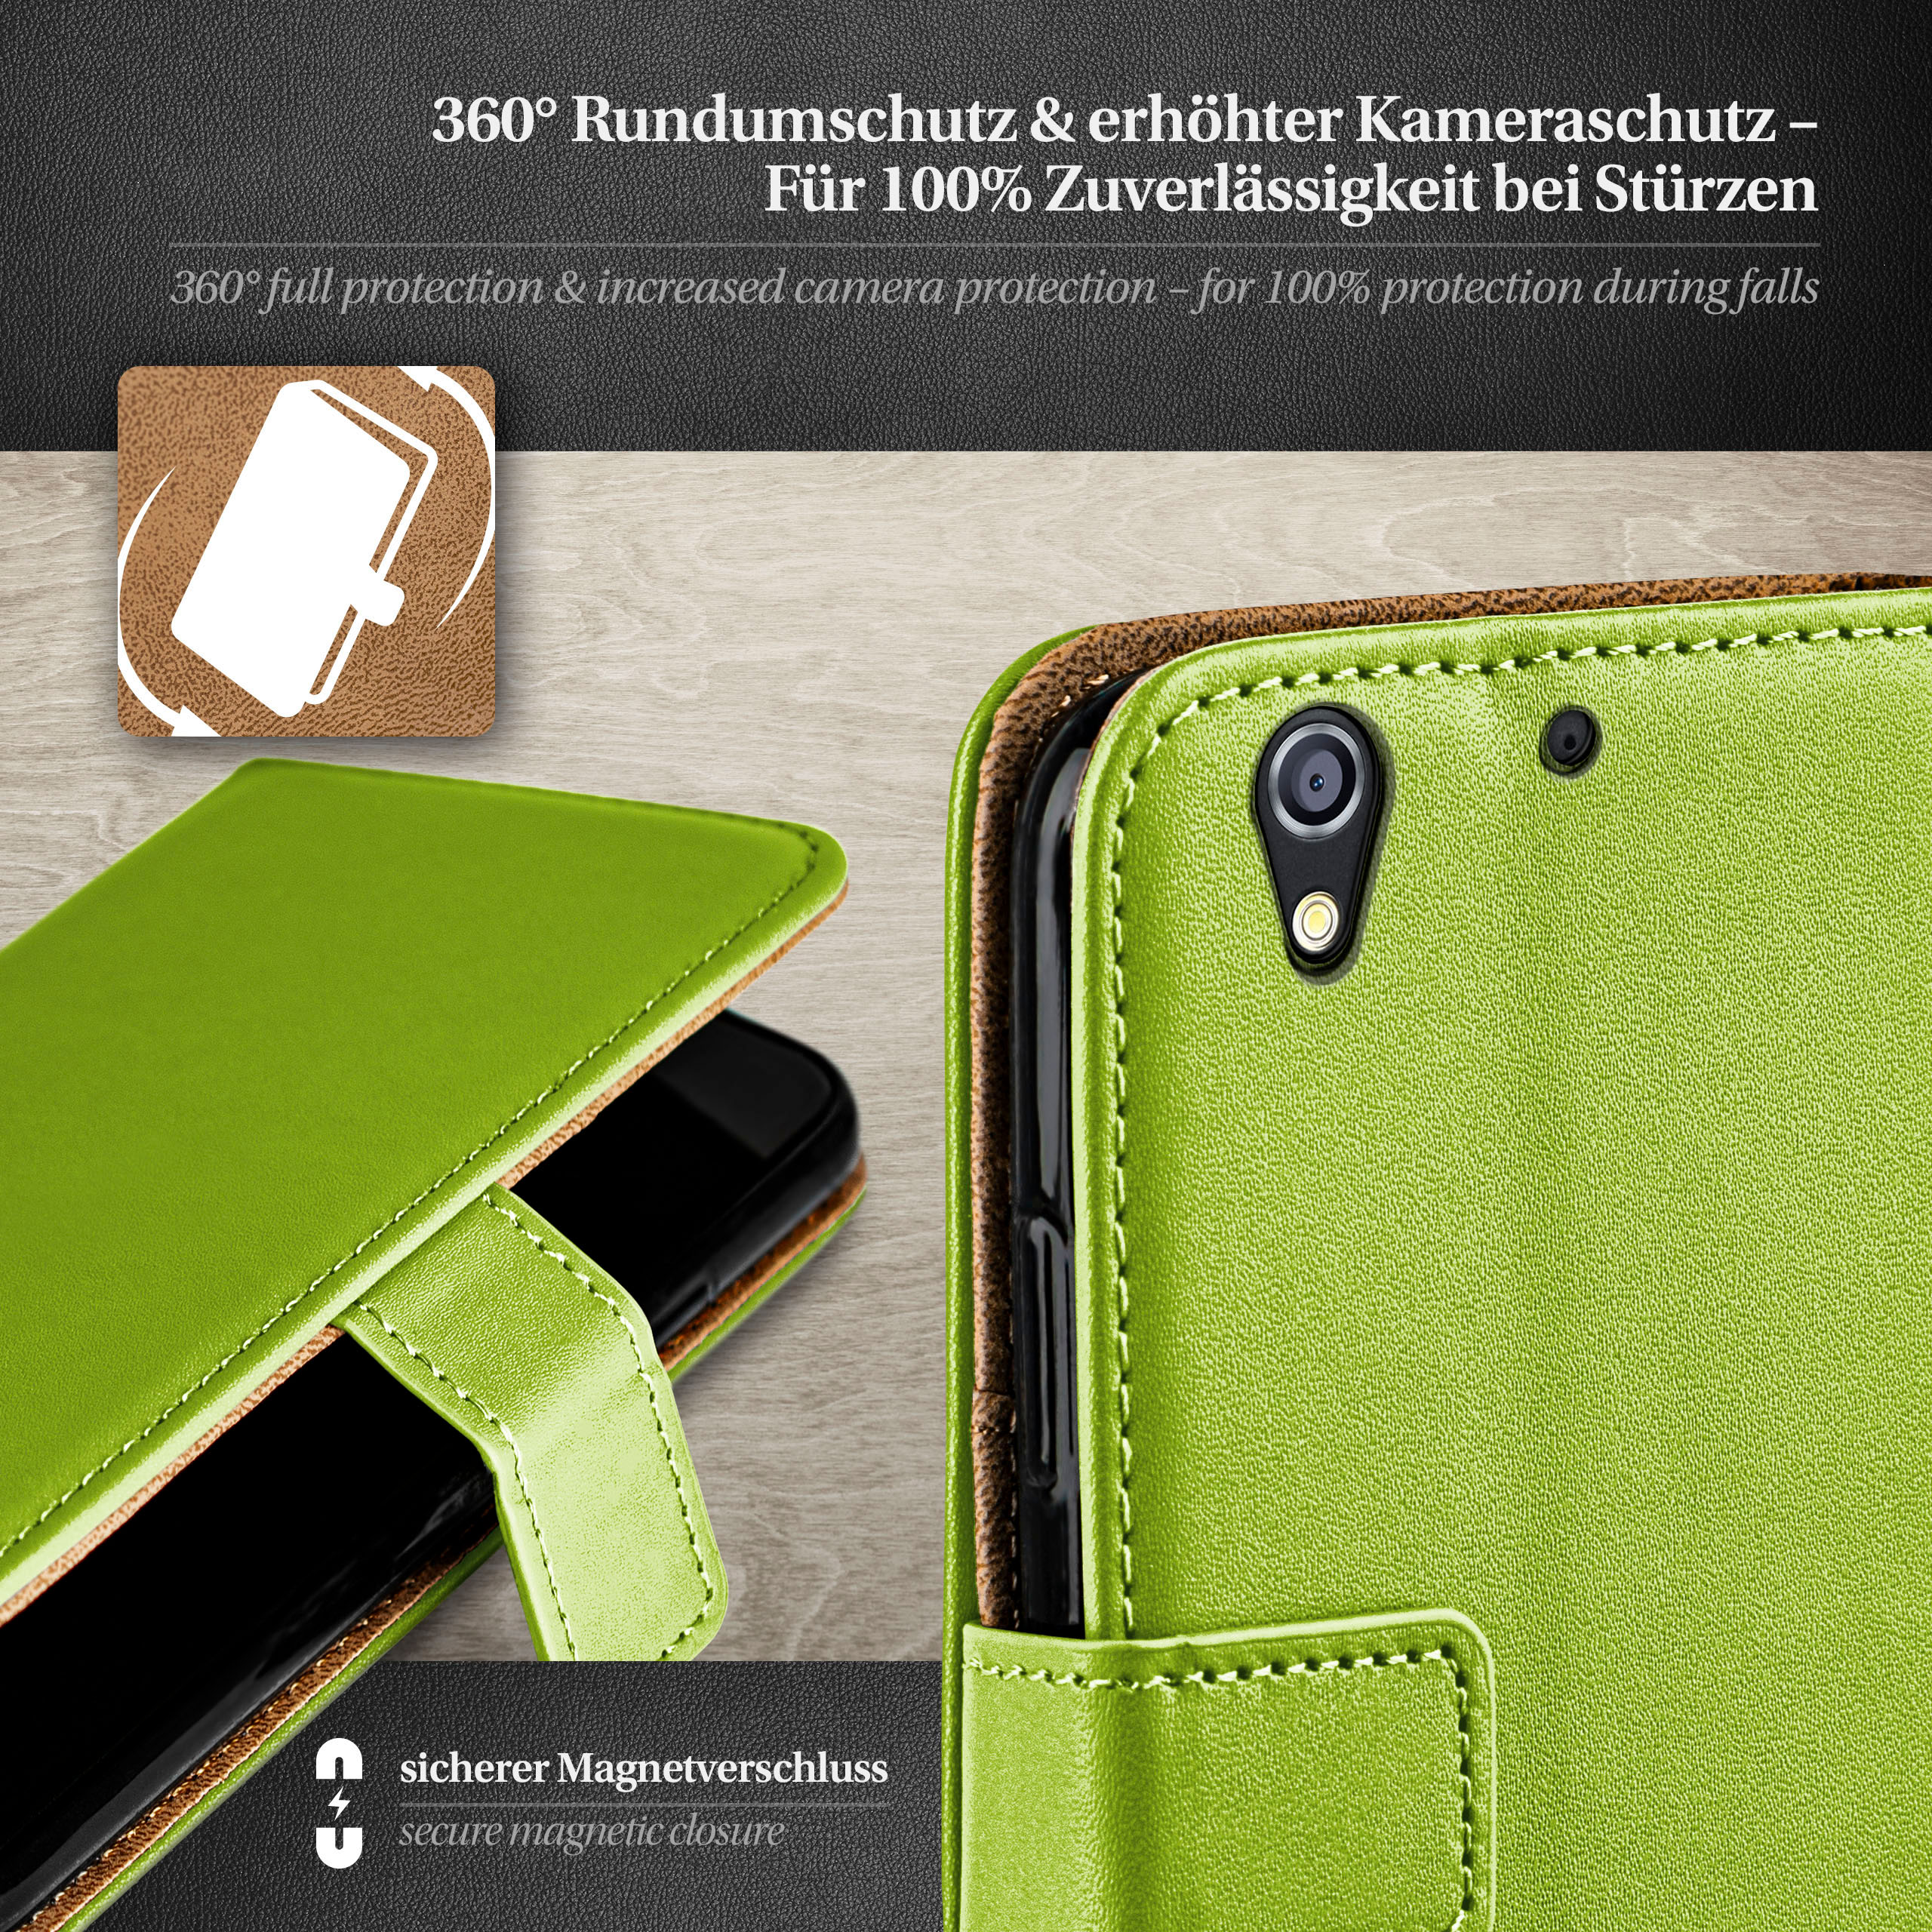 Desire 626G, Book Lime-Green Bookcover, Case, MOEX HTC,